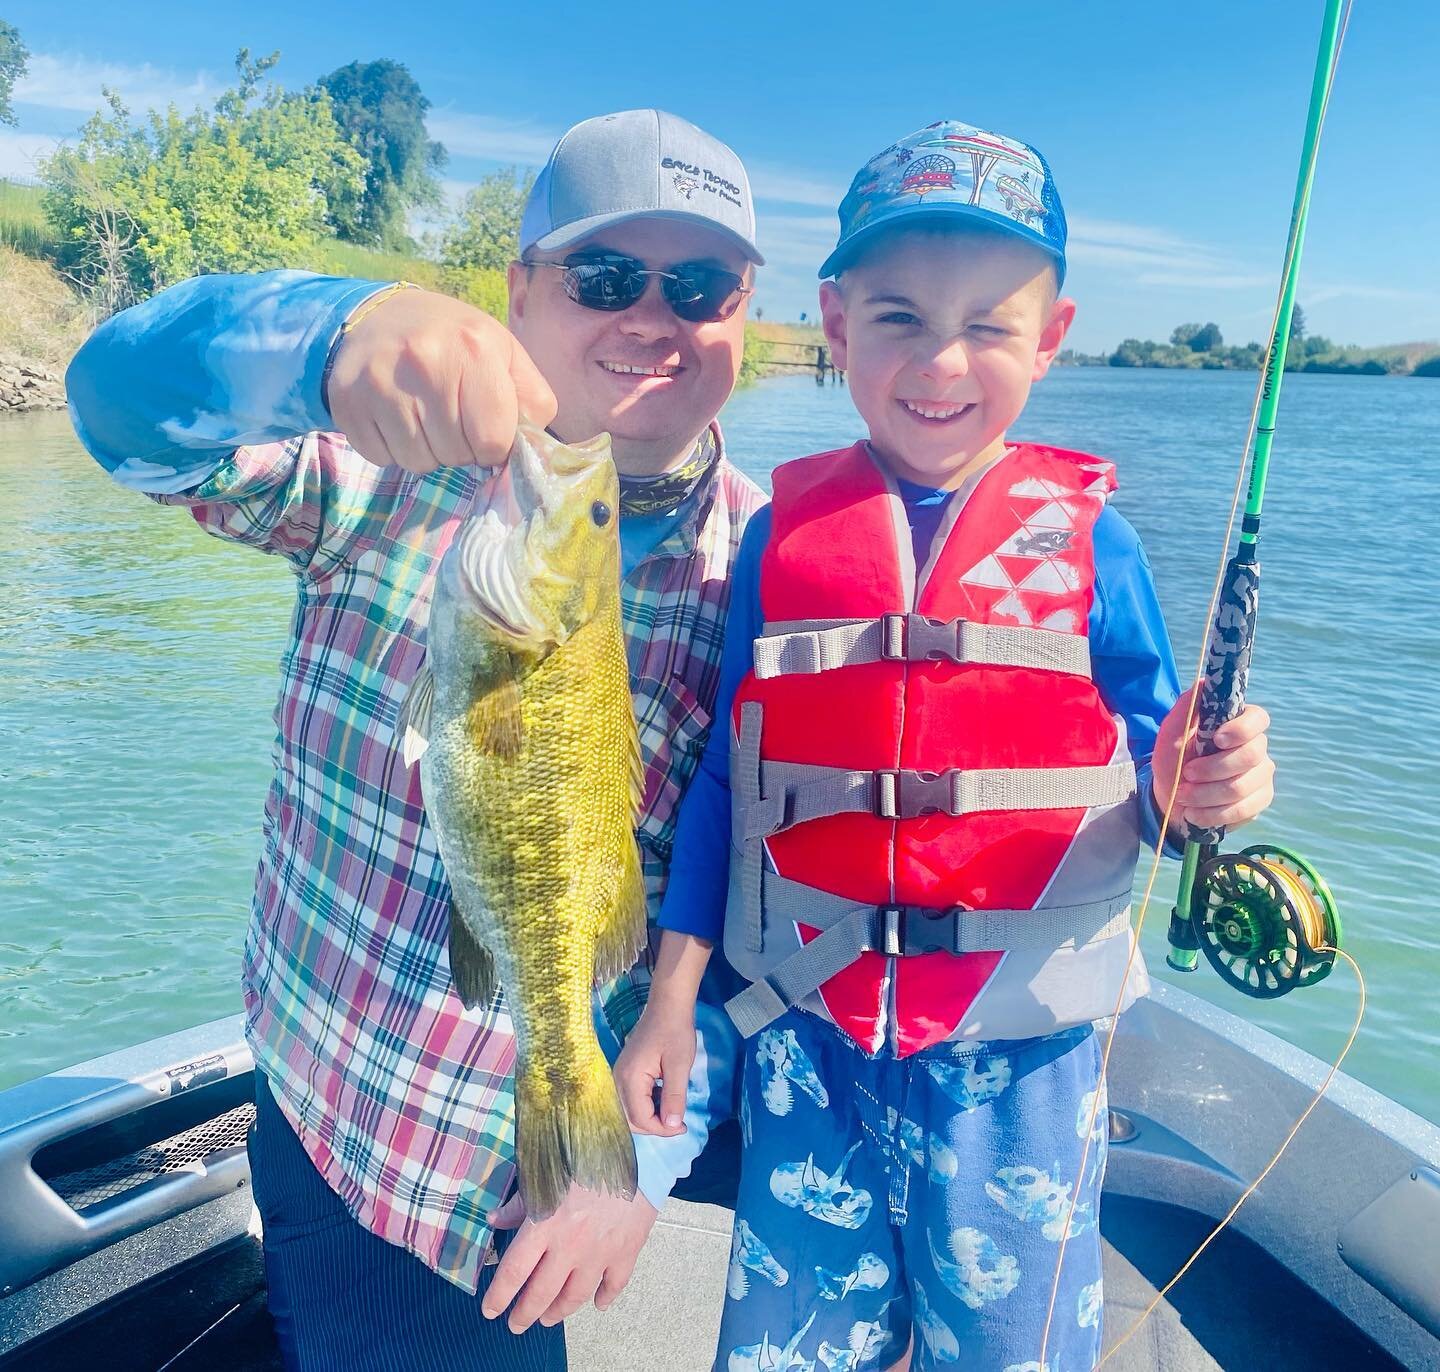 Getting kids into their first fish on a fly rod is an absolute blast!  @redingtongear @rioproducts @galvanflyreels @costasunglasses @calbassunion @brycetedfordflyfishing